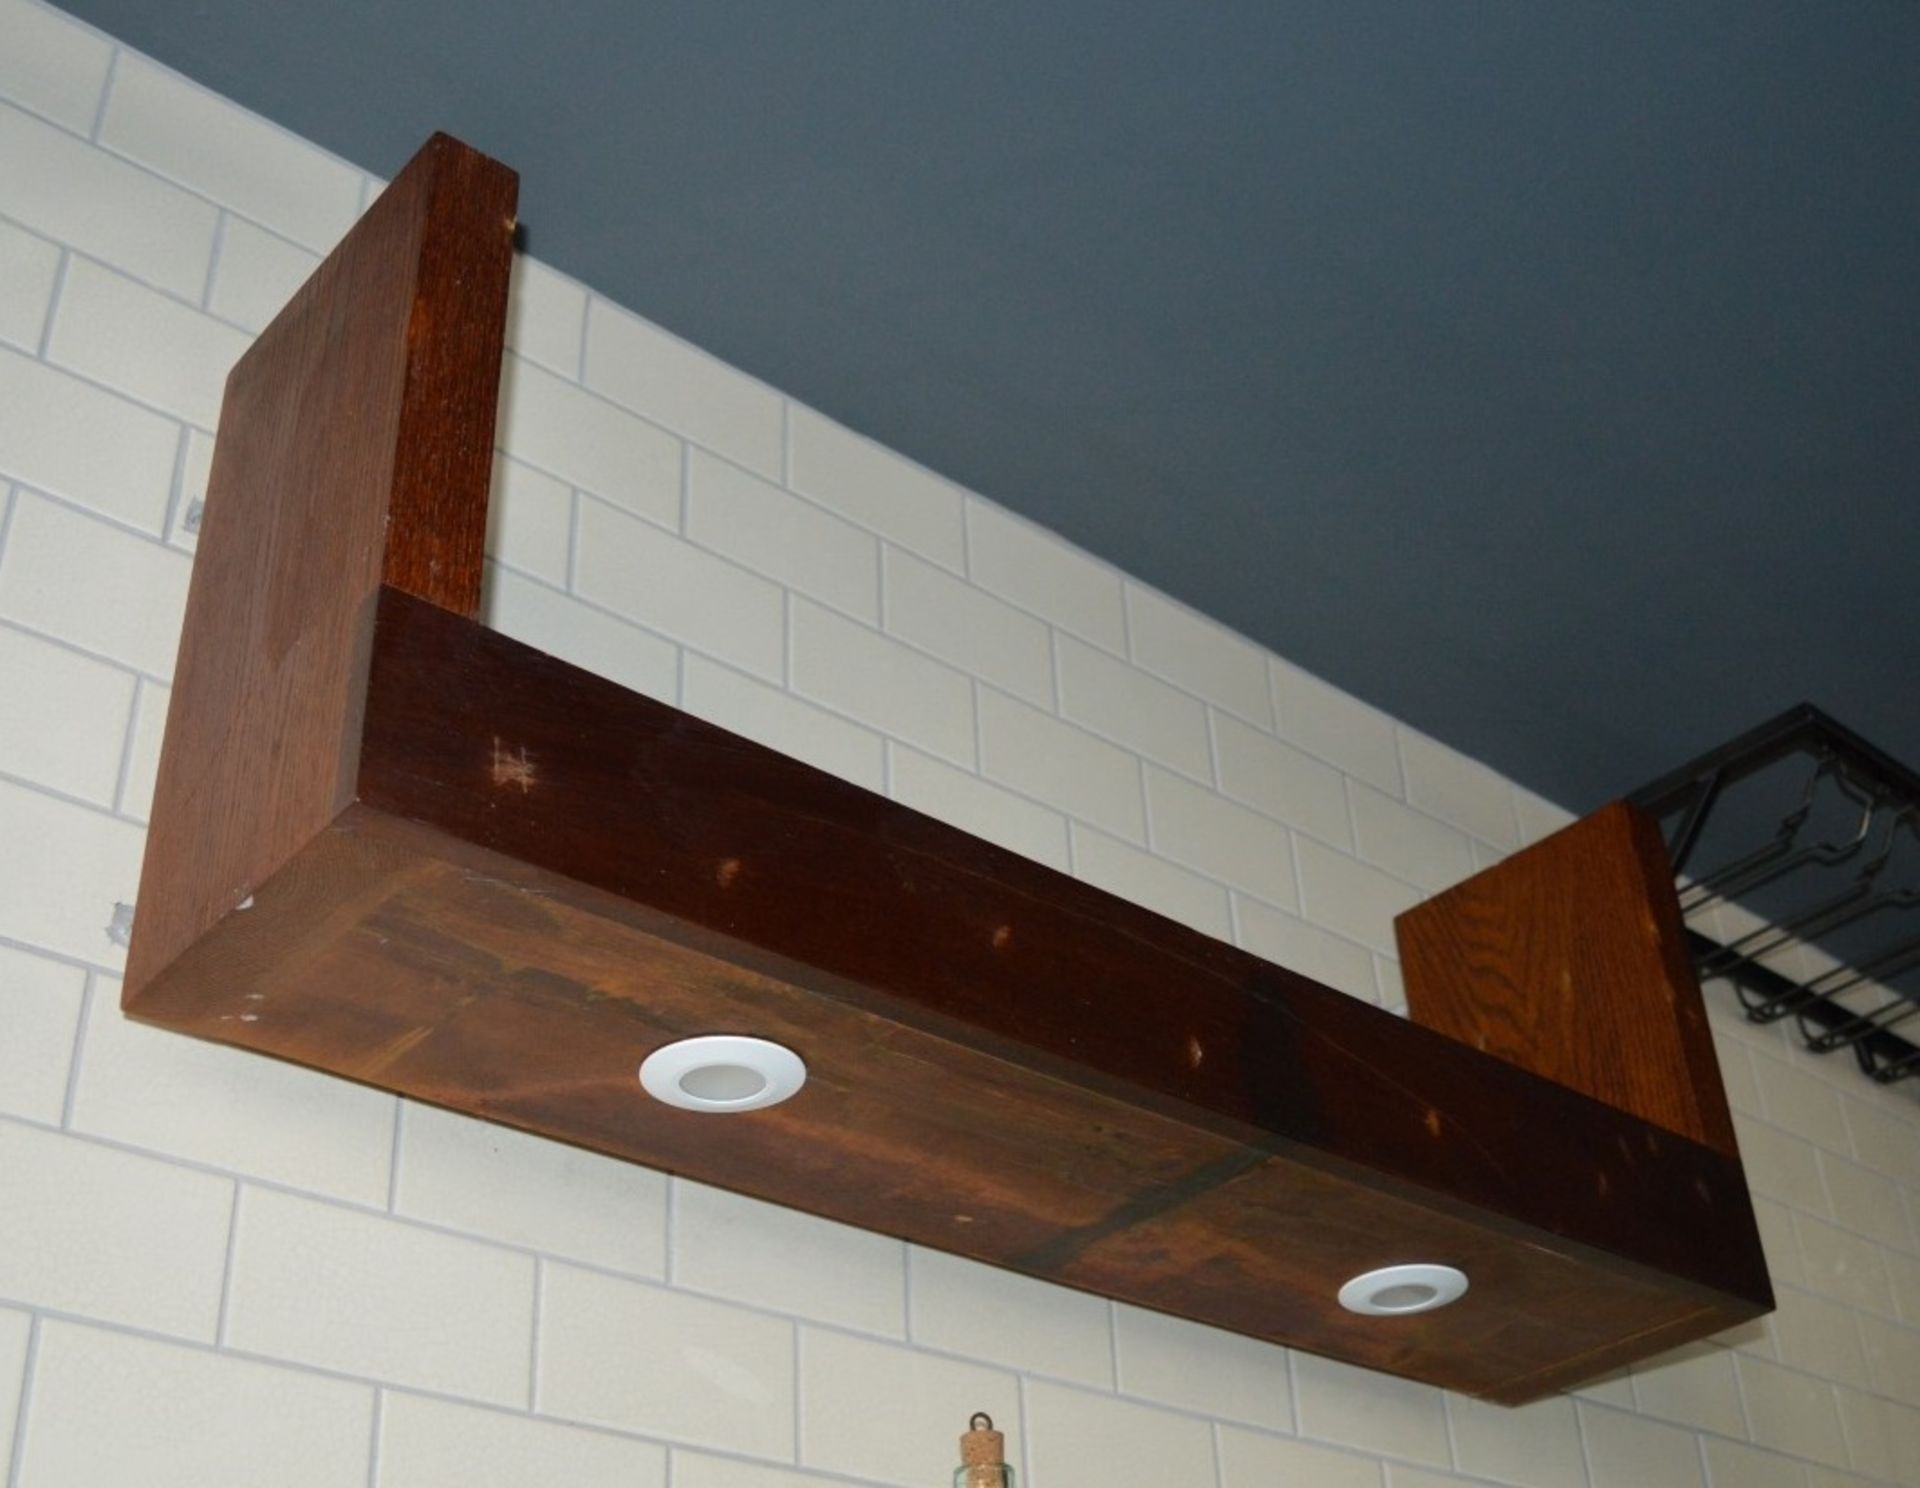 3 x Wooden Wall Shelves - CL245 - Location: London EC4M - Image 3 of 3